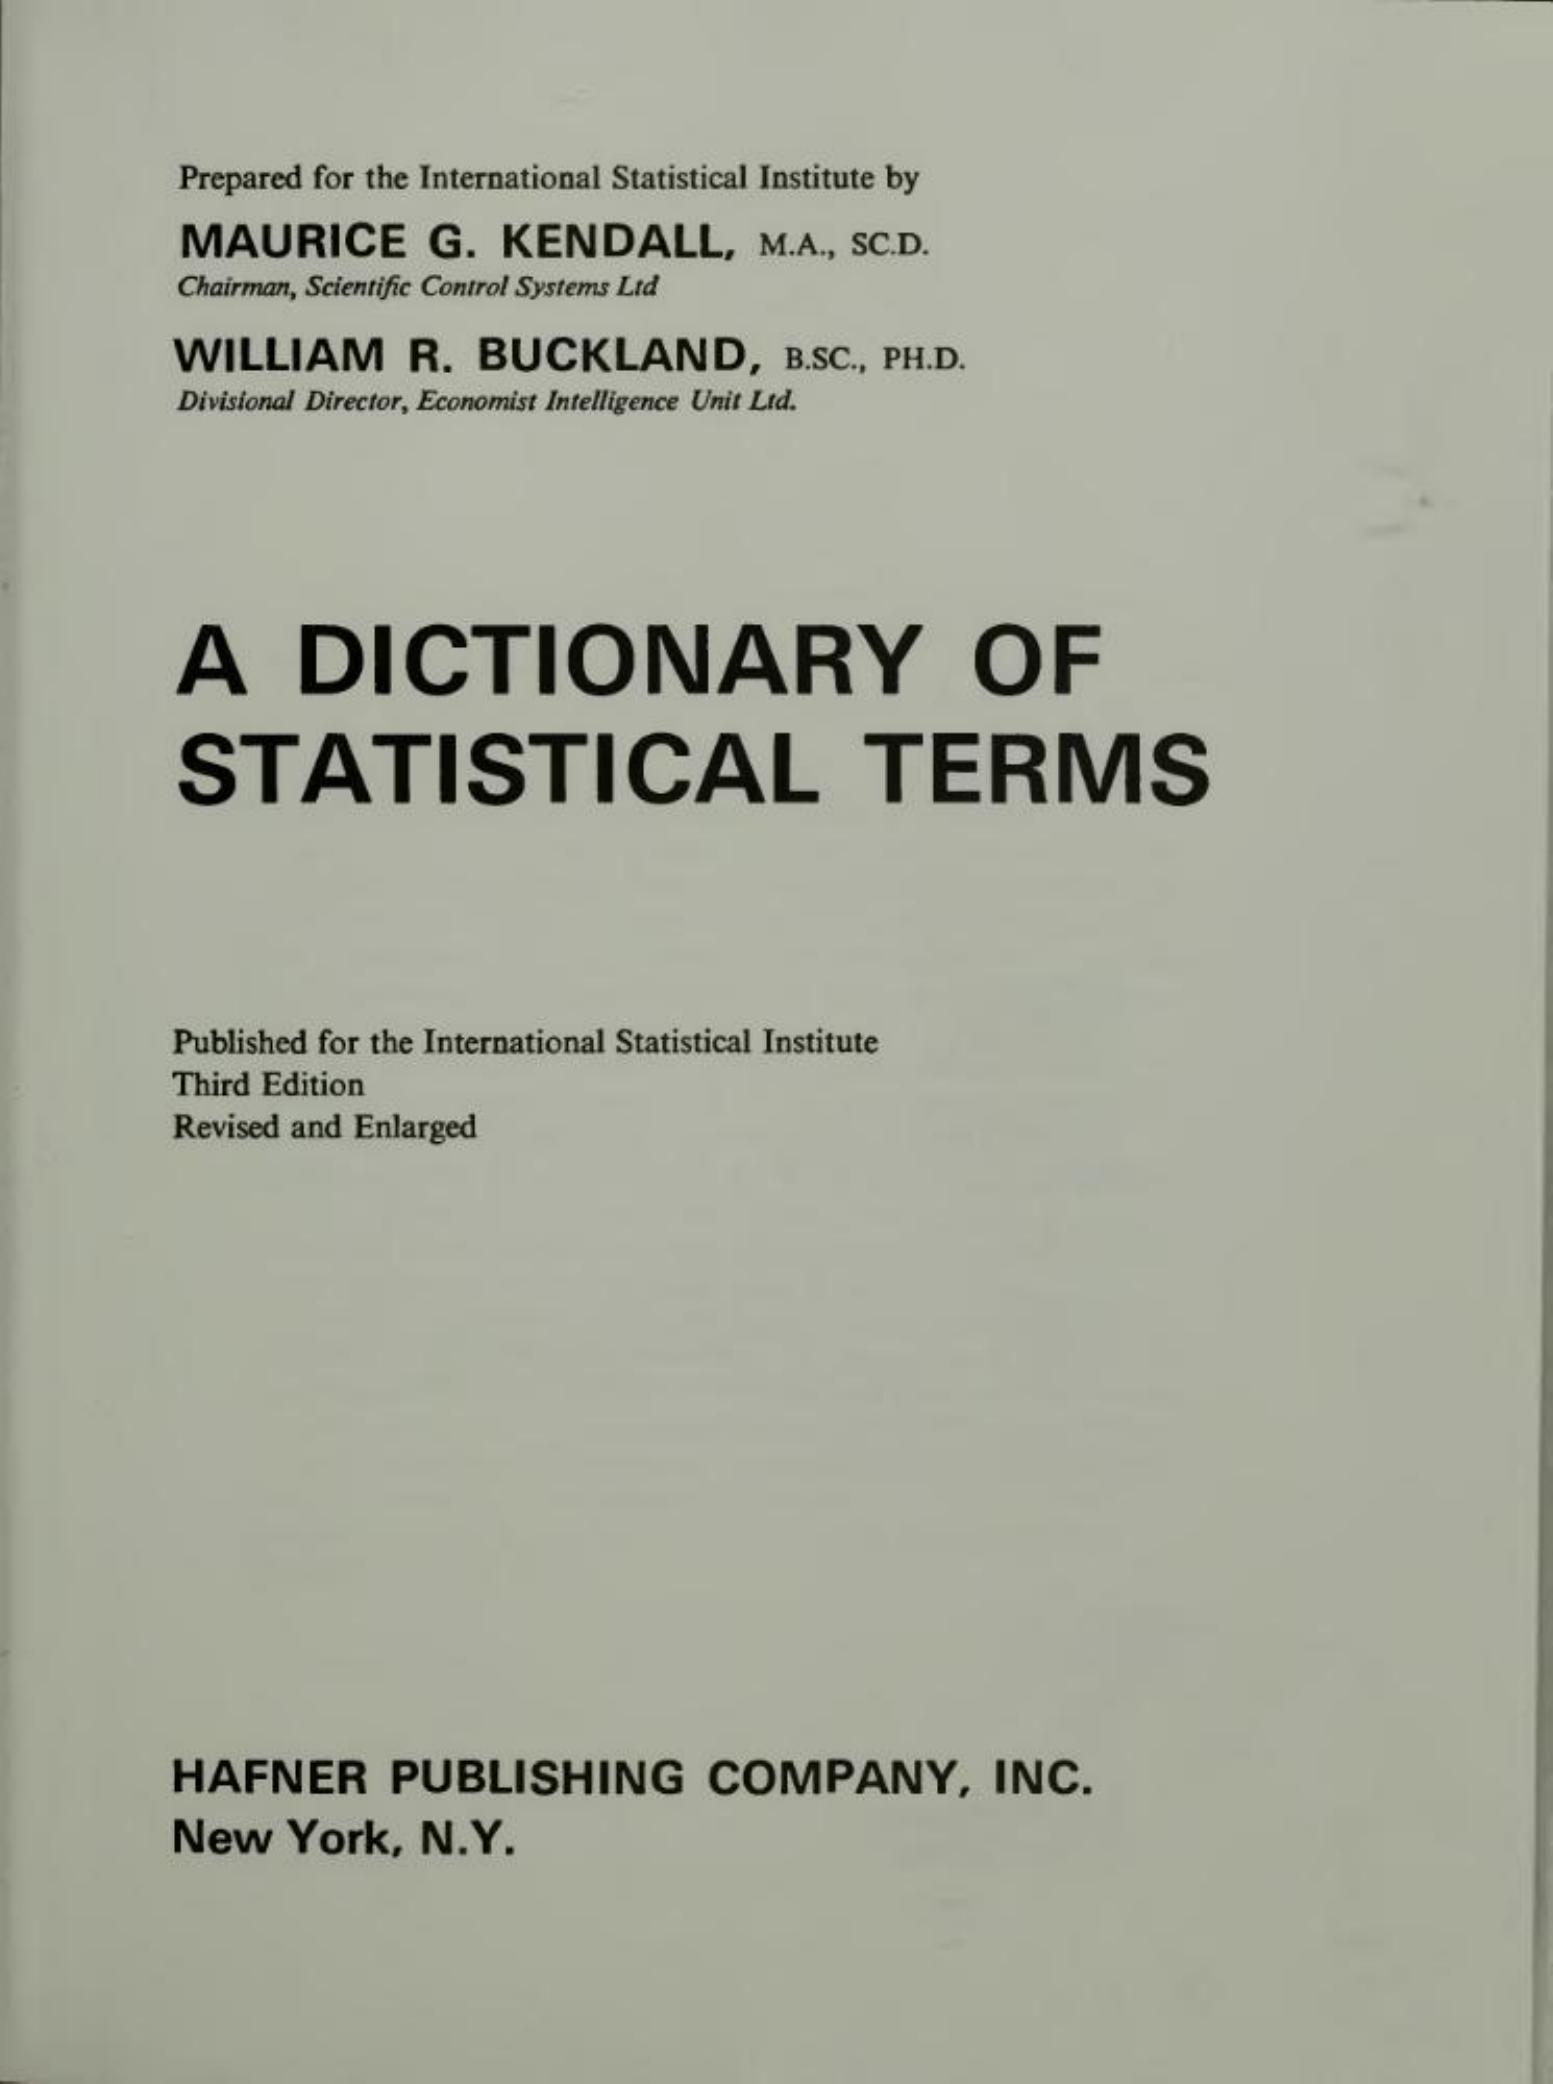 A Dictionary of Statistical Terms